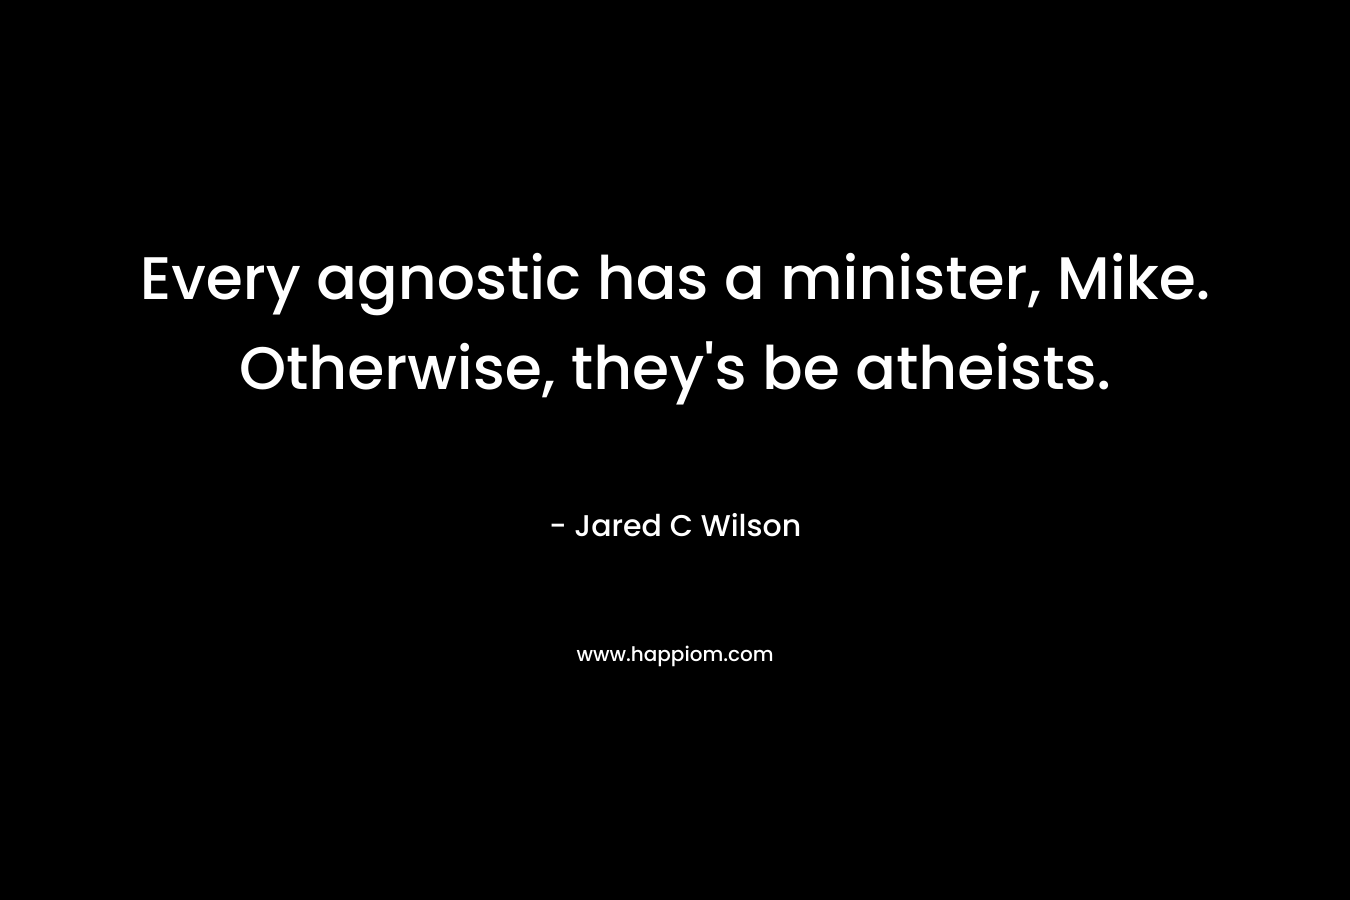 Every agnostic has a minister, Mike. Otherwise, they's be atheists.